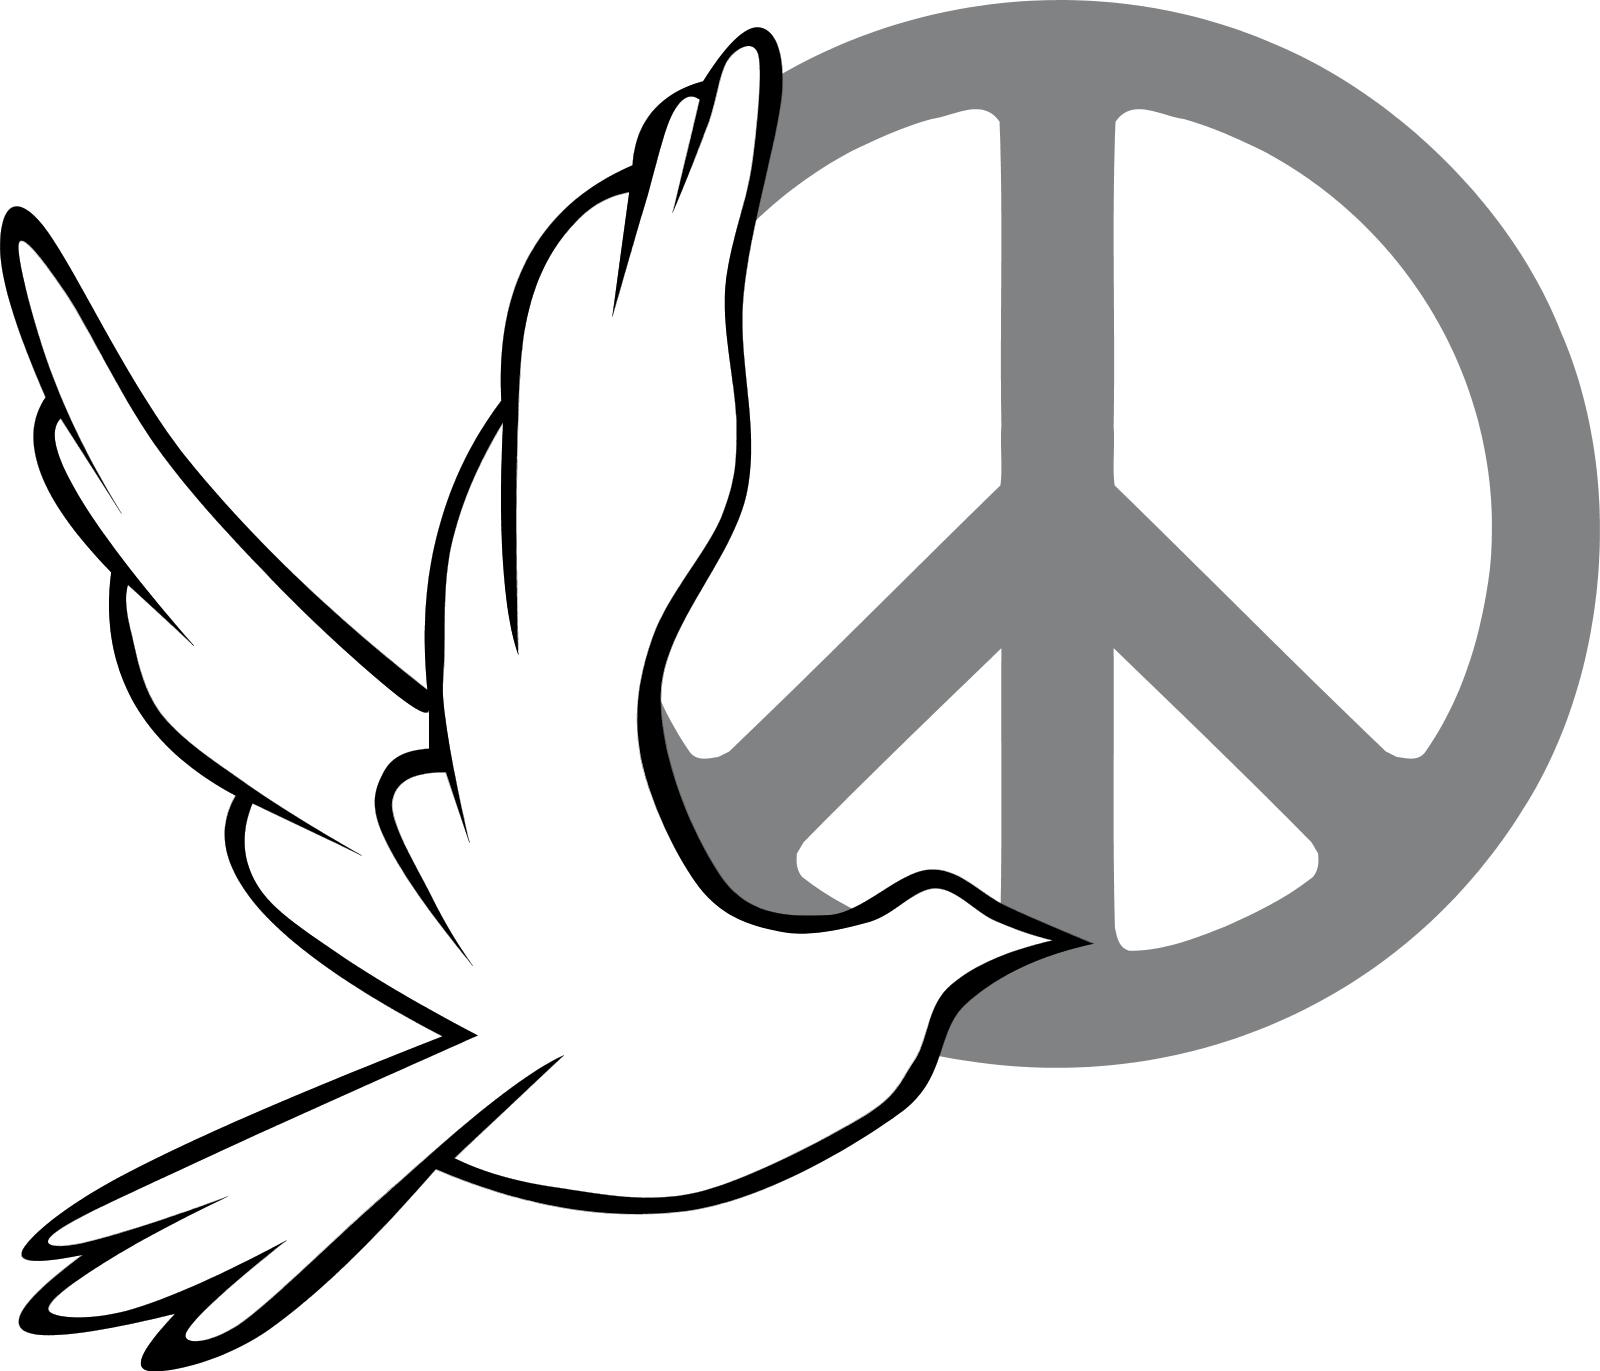 dove-peace-14.png - Green Party of Delaware